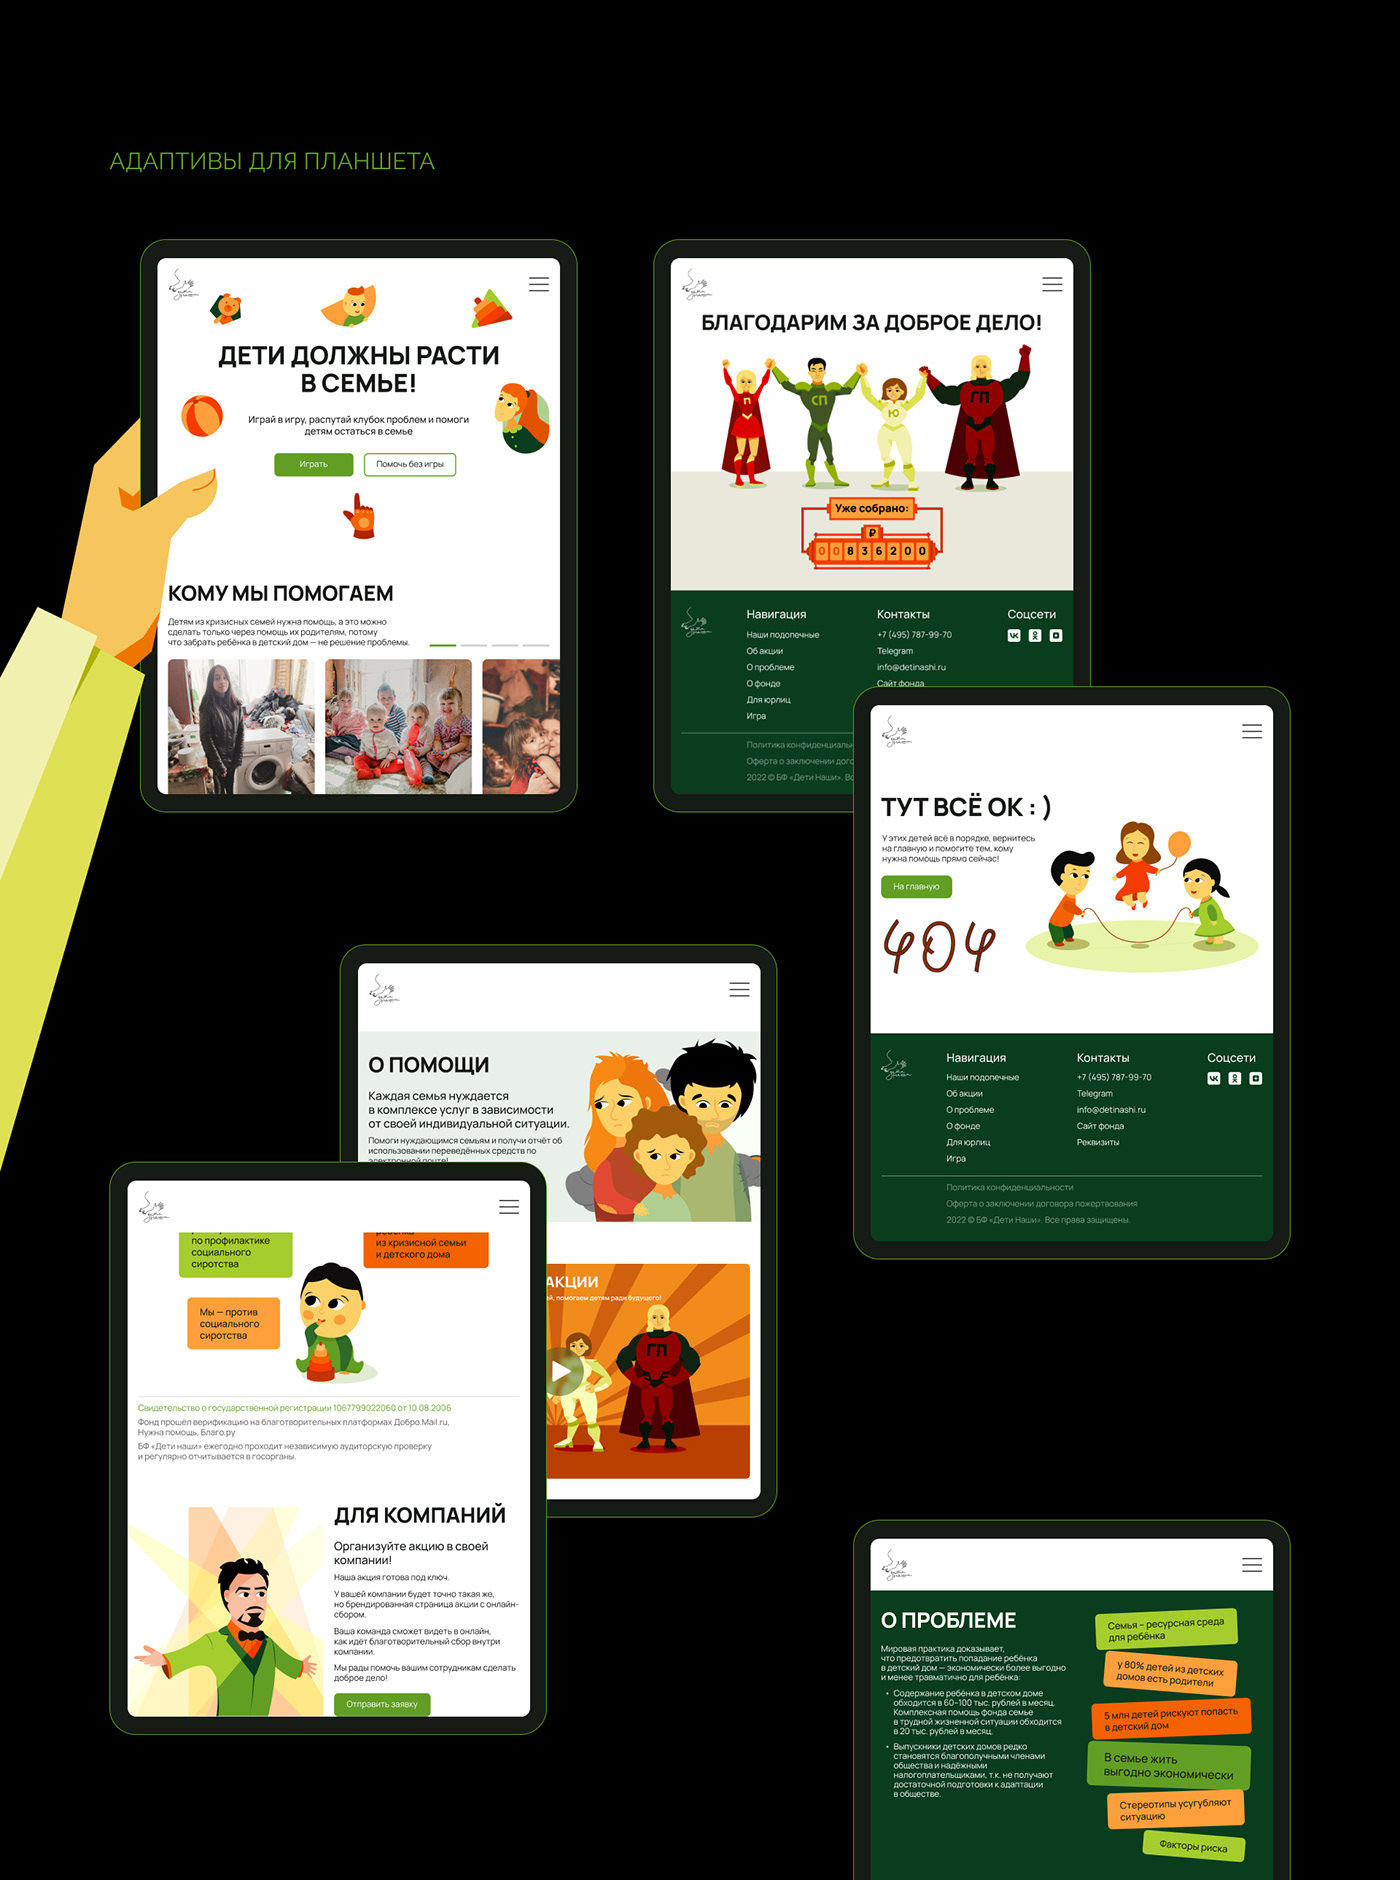 Tablet adaptive design with illustrations and motion graphics for a charity organization